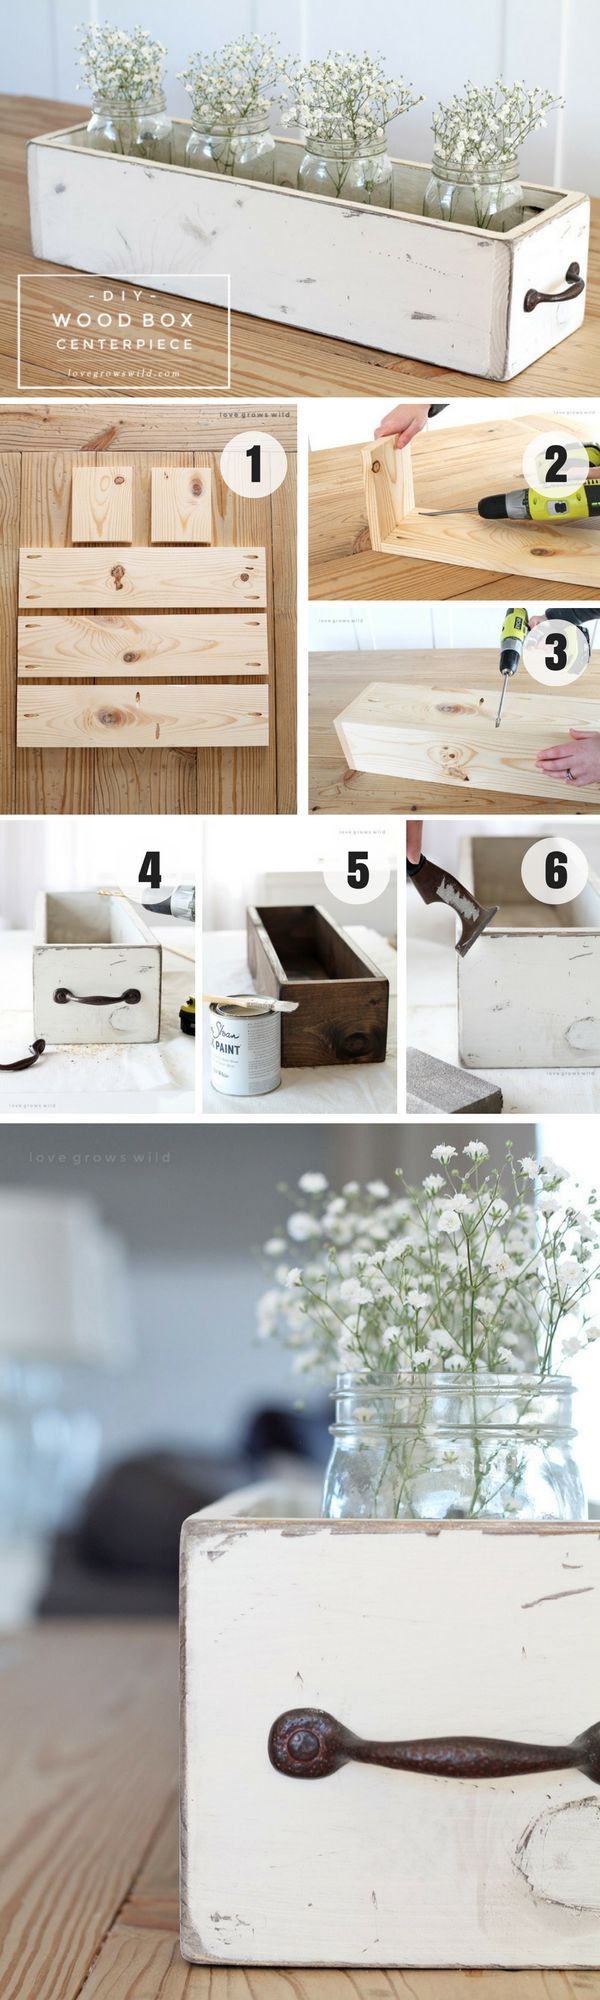 Check out how to build an easy DIY Wood Box Centerpiece @istandarddesign